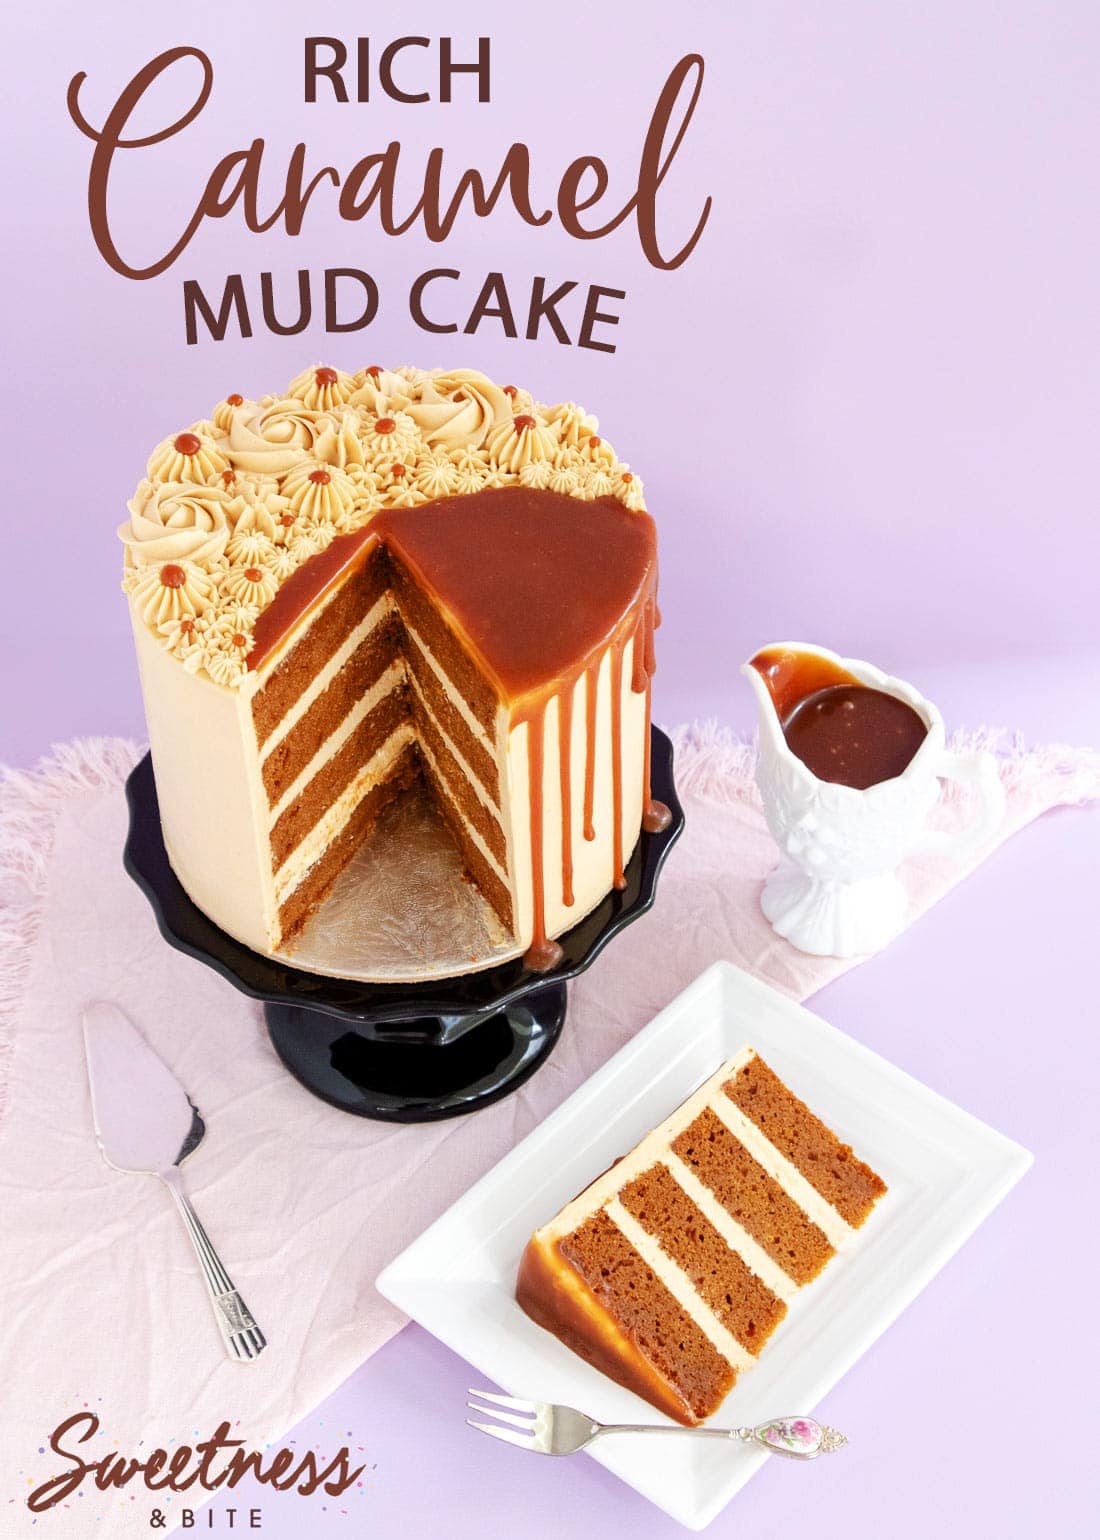 Caramel mud cake on a black cake stand, a slice of cake on a white plate, and a small jug of caramel sauce.